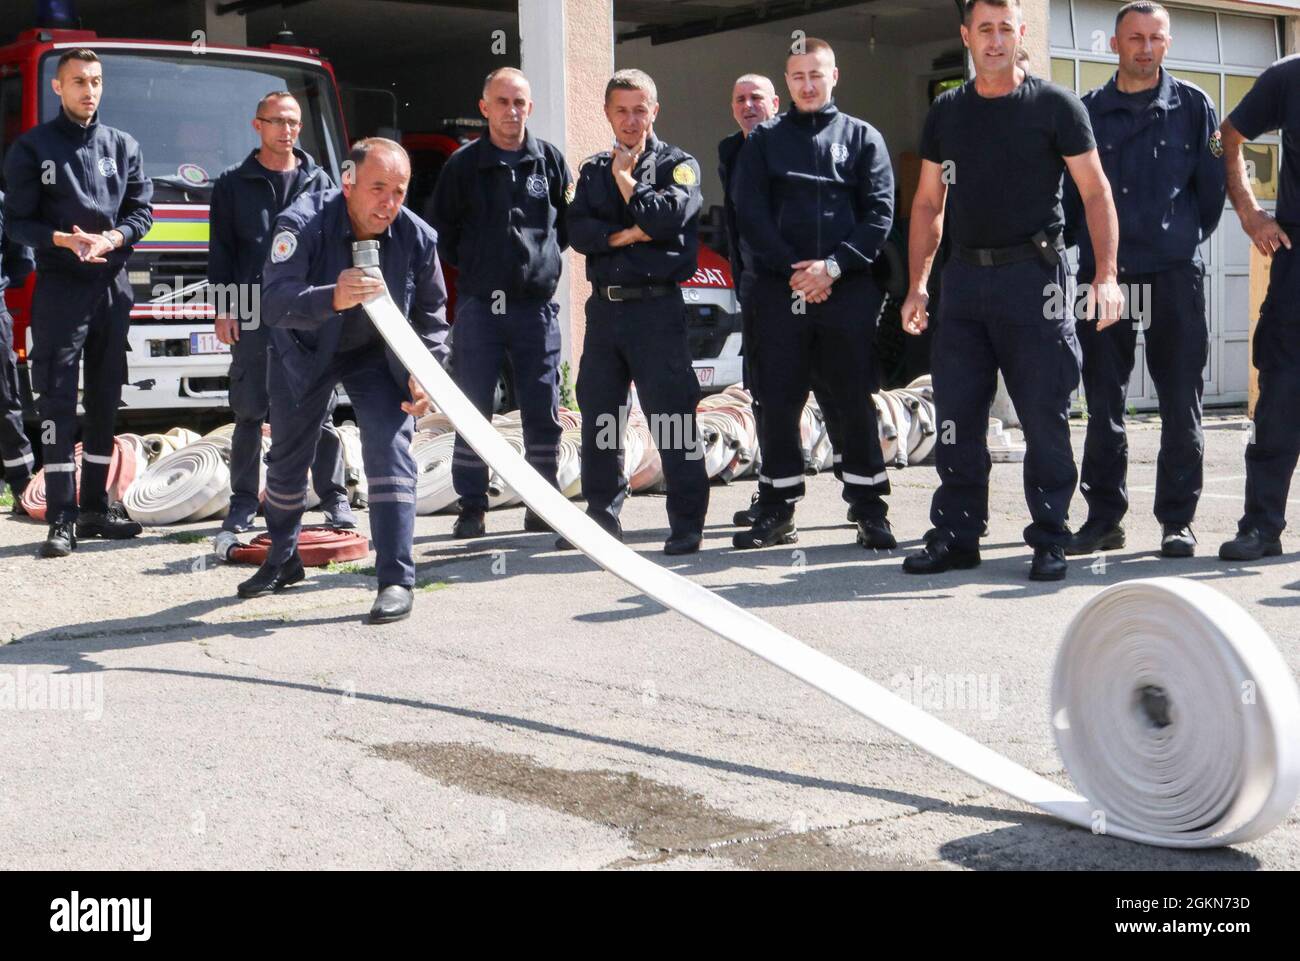 A member of the Ferizaj/Urosevac Fire Department unrolls a hose in Kosovo on June 3, 2021. Working through the Kilo 21 Liaison Monitoring Team assigned to Regional Command-East, Kosovo Force, the Camp Bondsteel Fire Department donated 140 sections of hoses to the municipality’s only firefighting team. The CBS team showed the local station how to properly deploy, attach, use and store the hoses. Stock Photo